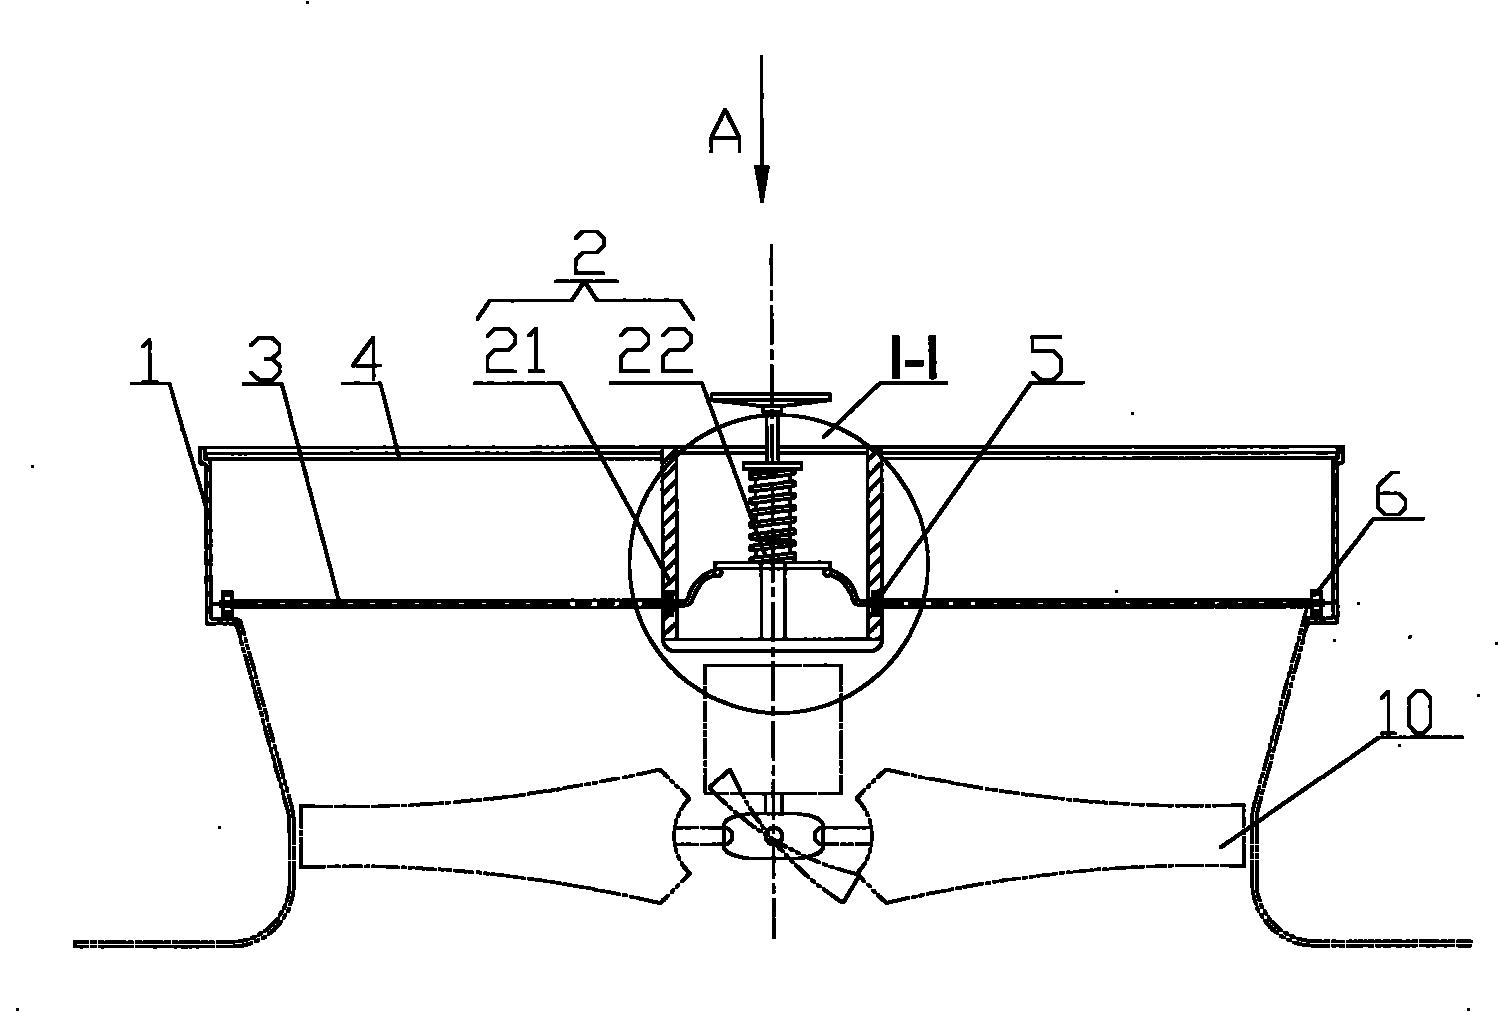 Axial flow fan and air valve thereof as well as cooling tower and air cooler